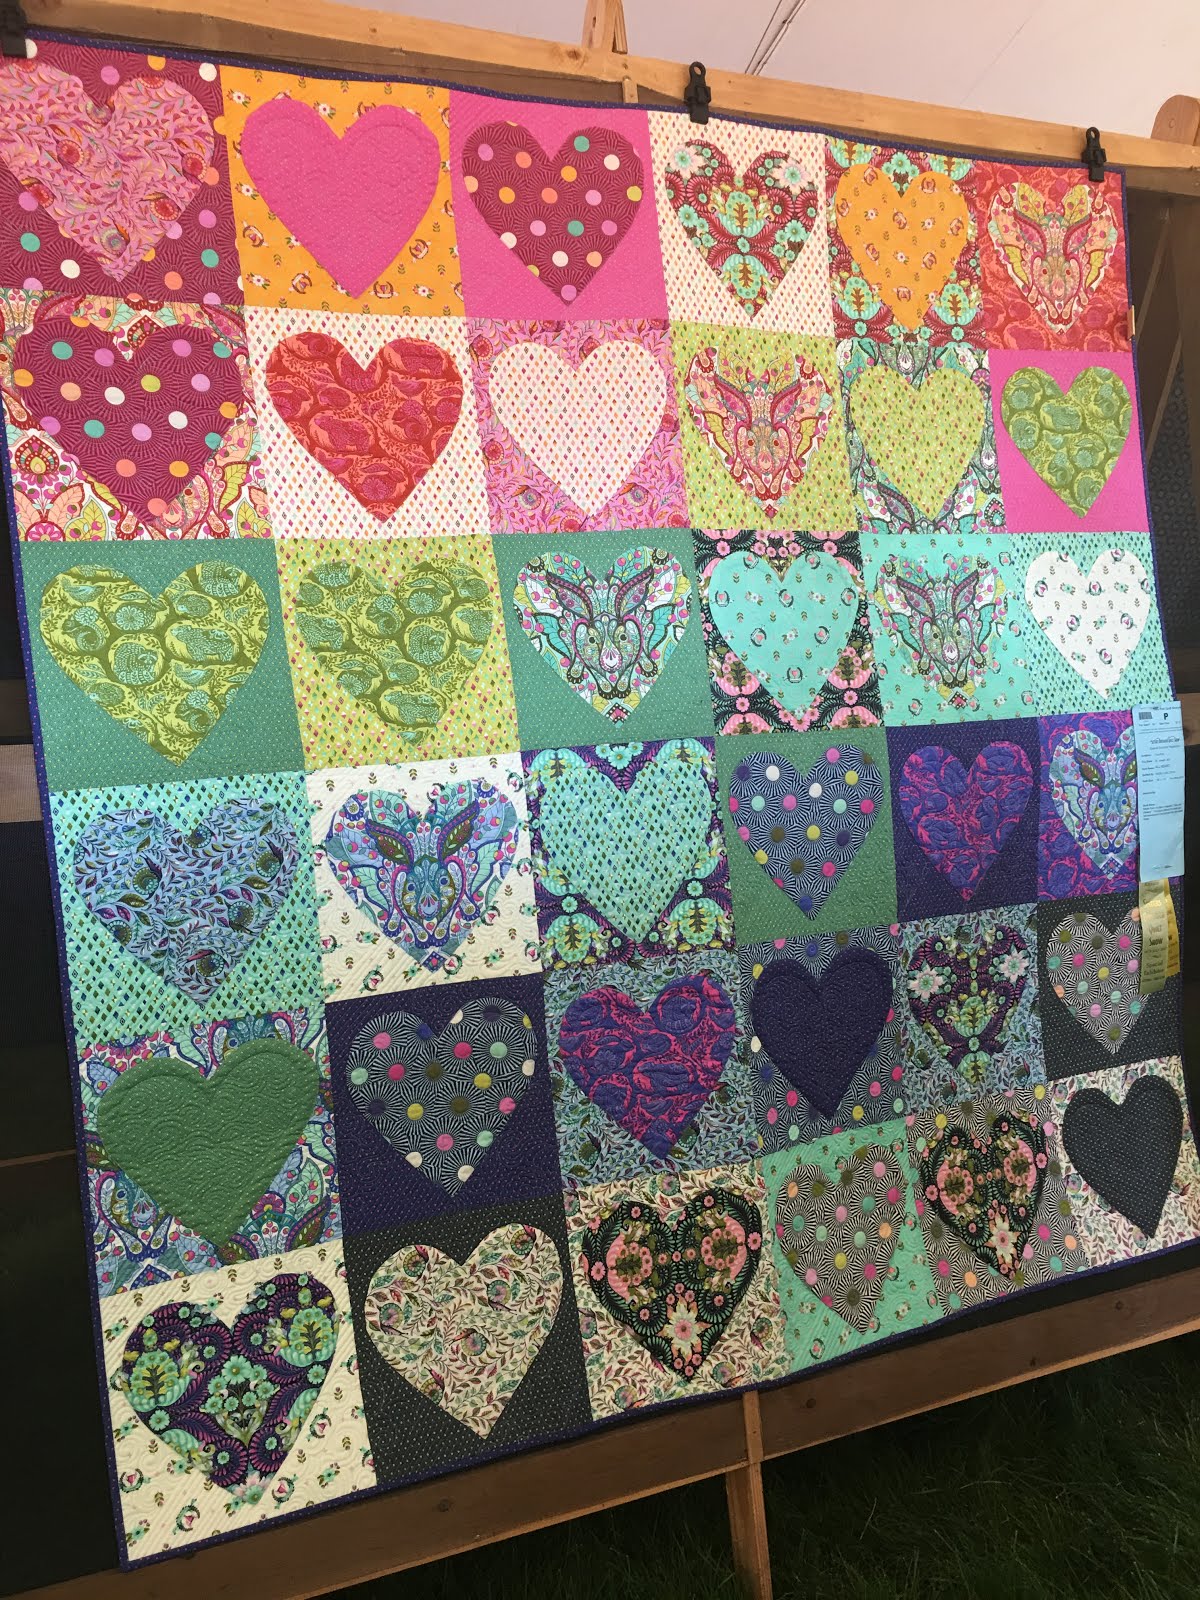 Barrister's Block: Quilt show, Part II (pictures!)